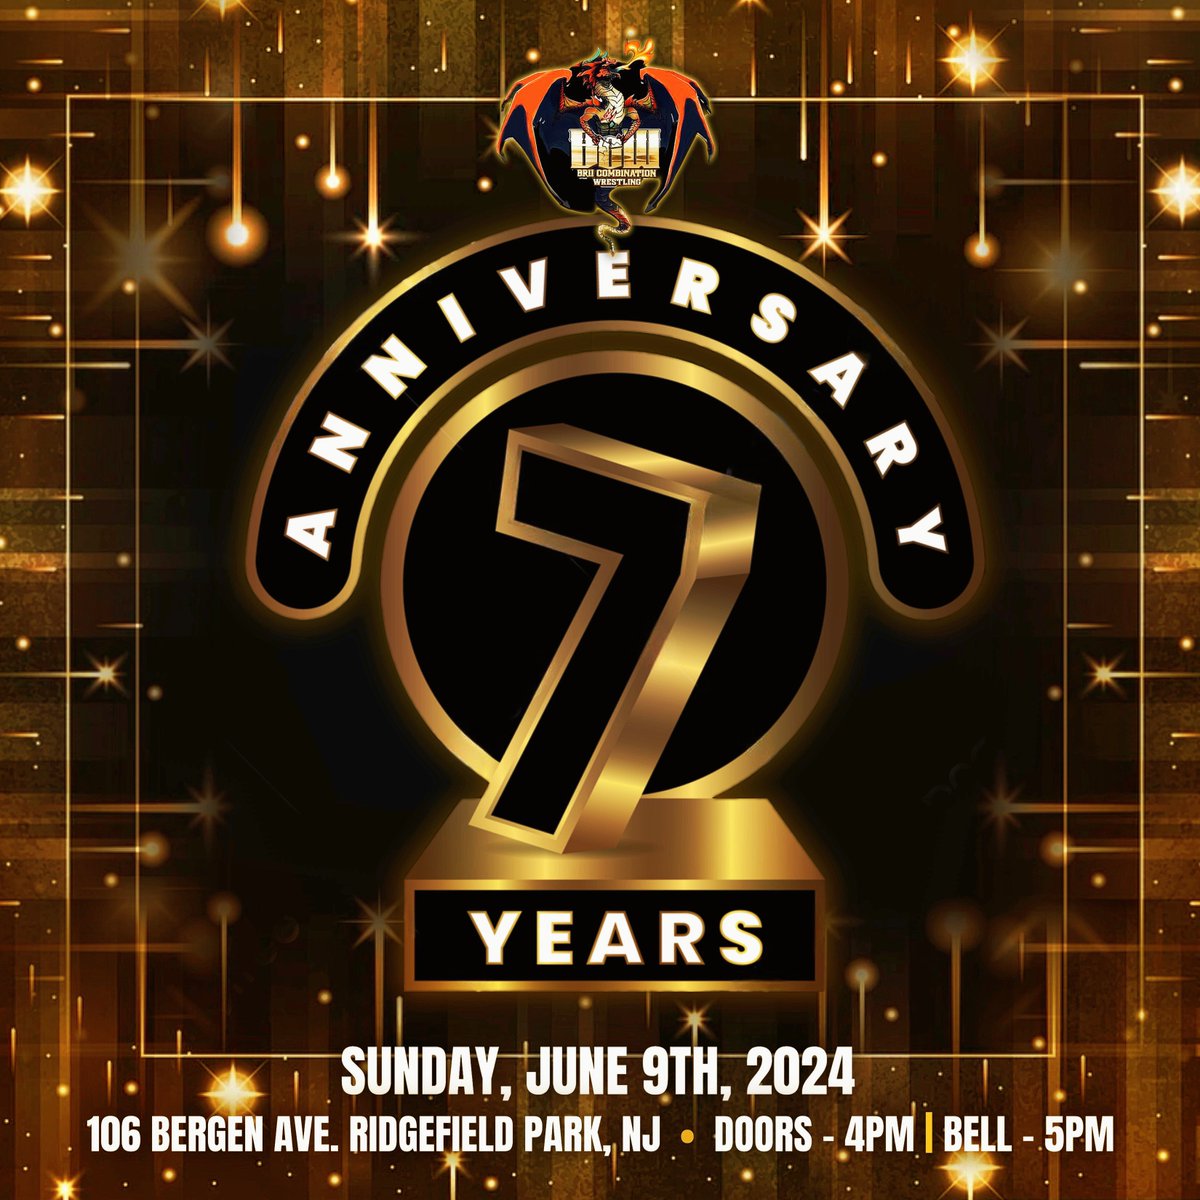 On June 9th, we officially celebrate 7 years of being in business! We couldn’t have done it without our amazing wrestlers, talent, crew, and of course, the BCW Faithful 🙏 Come join us for our biggest event of the year, Anniversary 7: ANNI7.eventbrite.com